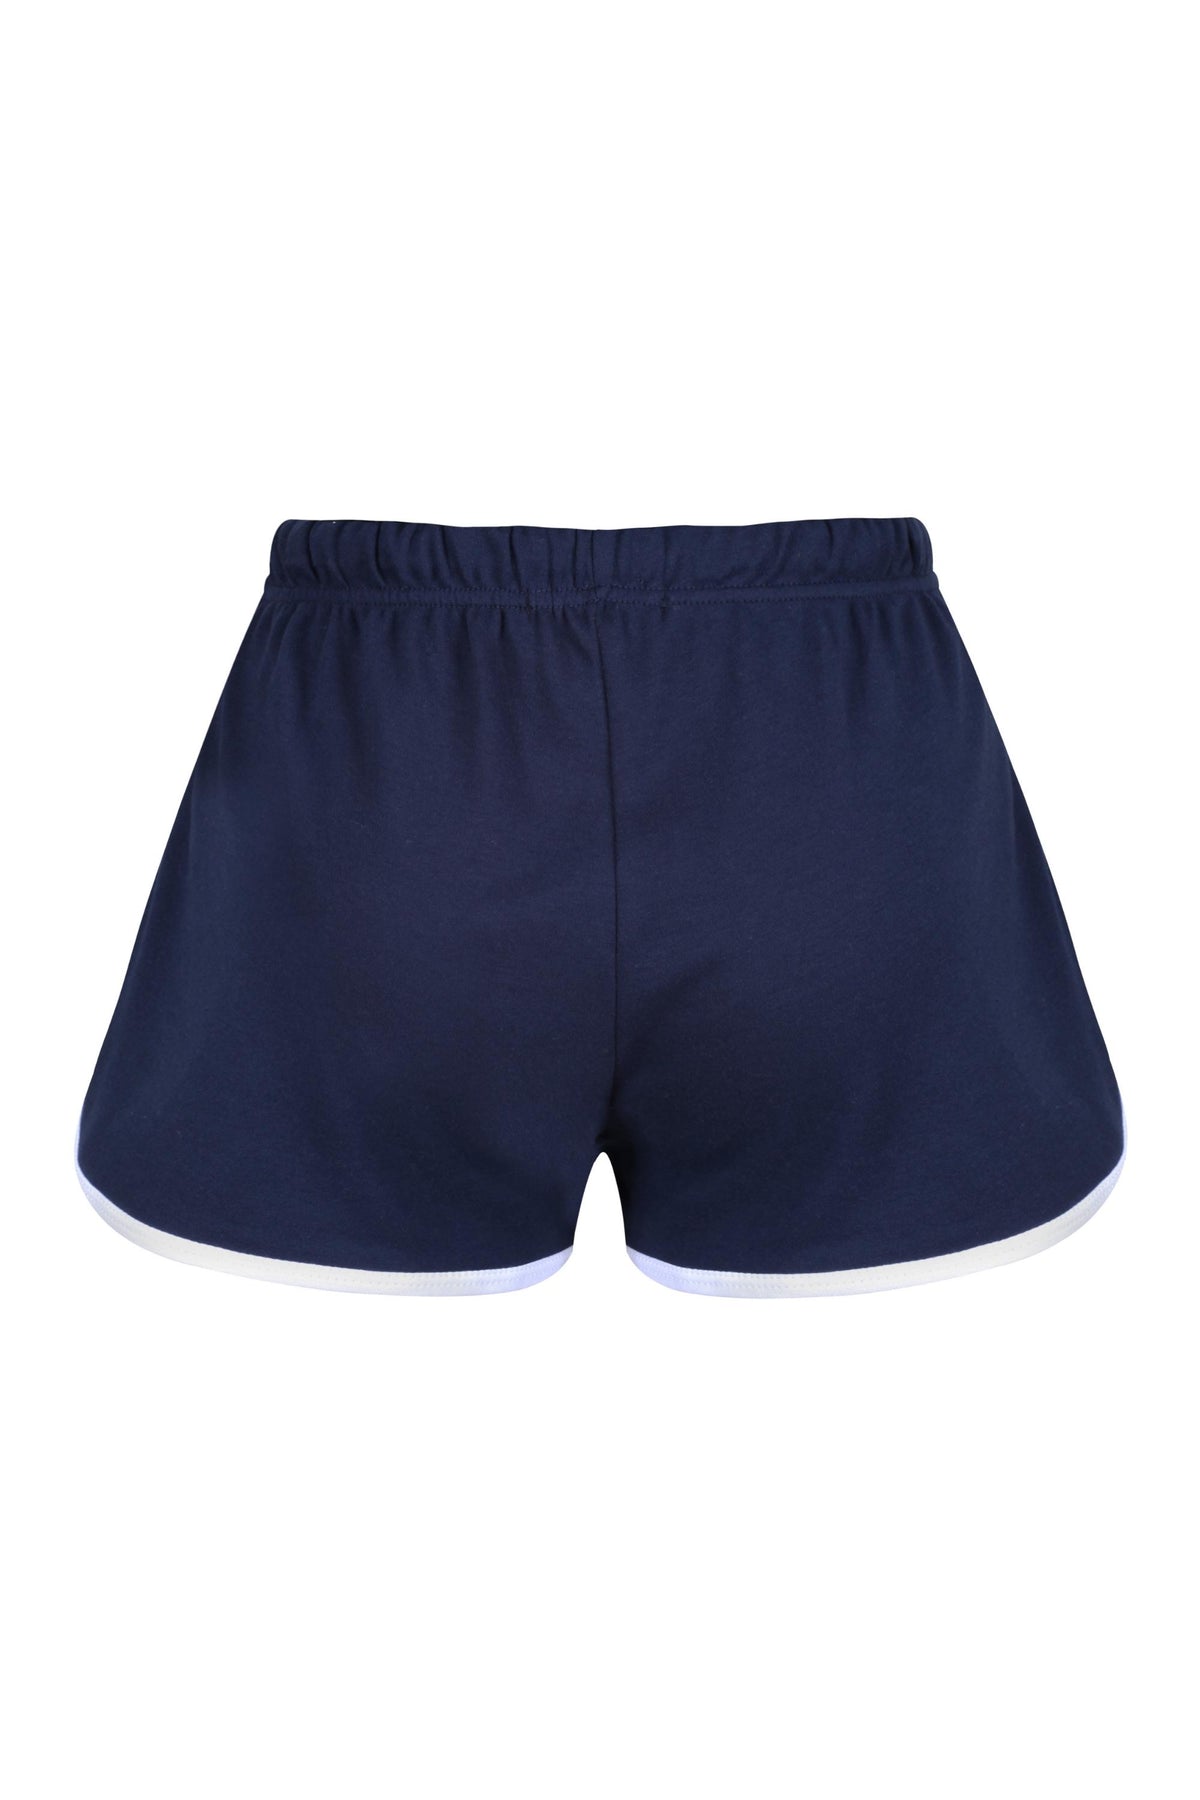 Basic Shorts - Navy - Whale Of A Time Clothing